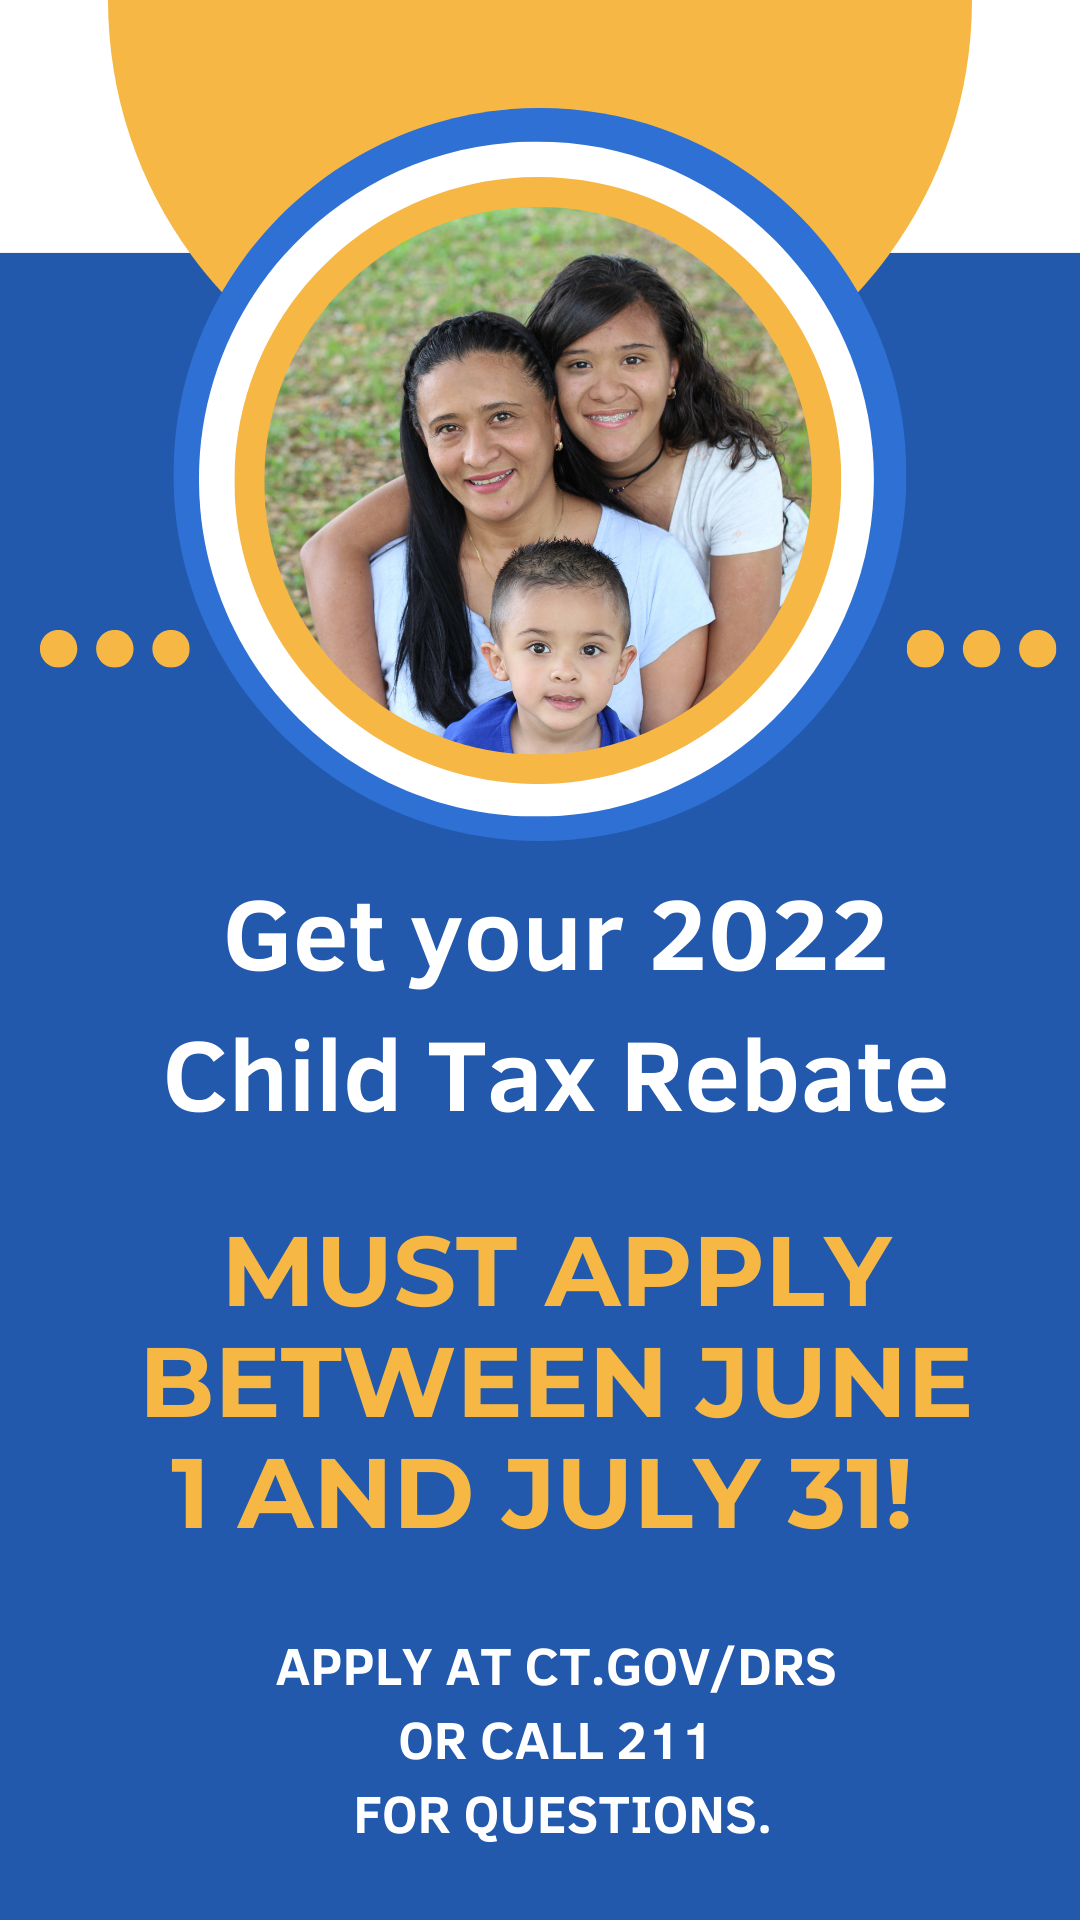 2022-child-tax-rebate-ends-july-31-access-community-action-agency